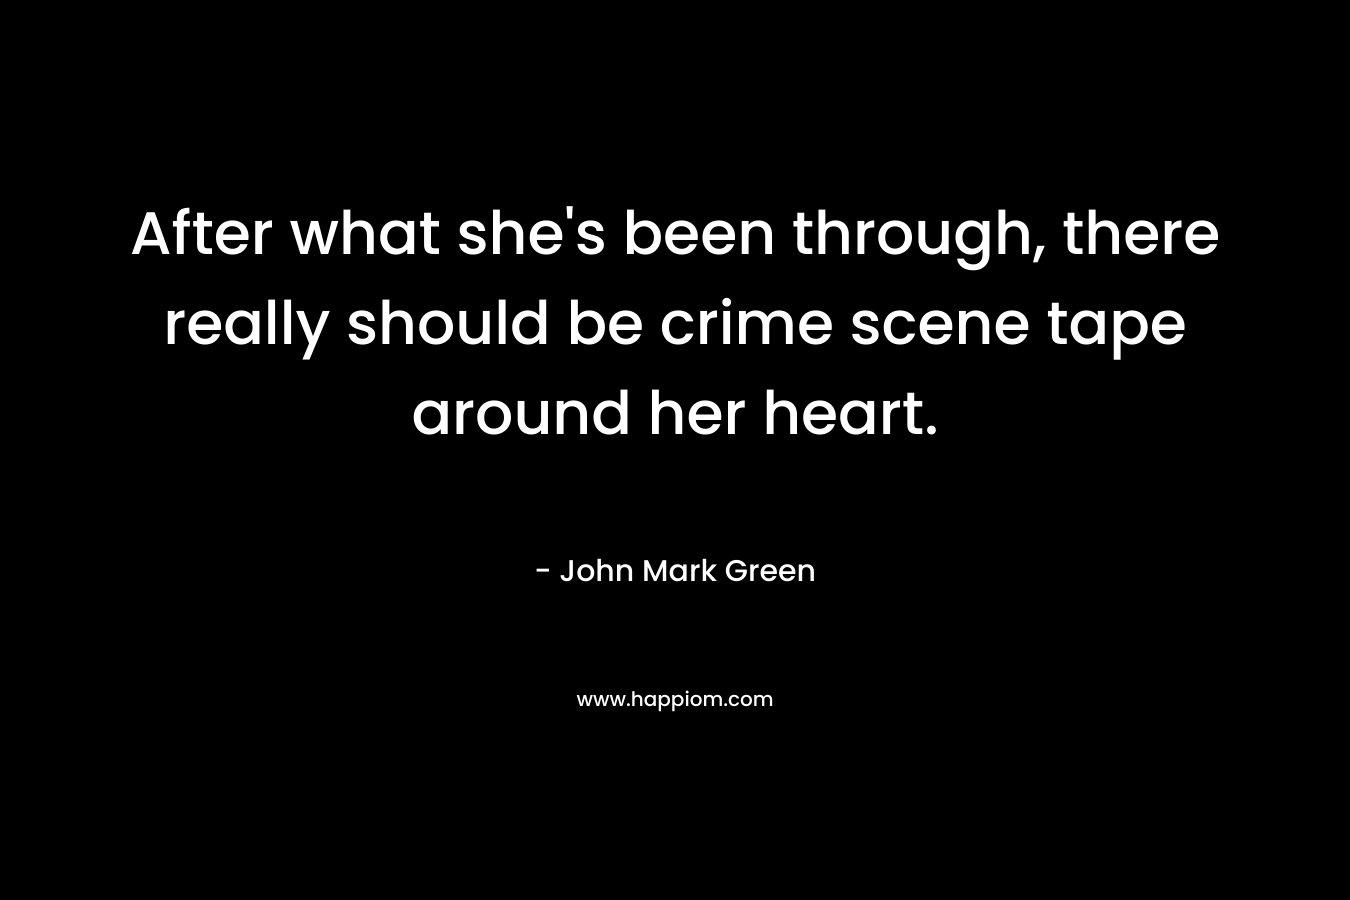 After what she’s been through, there really should be crime scene tape around her heart. – John Mark Green